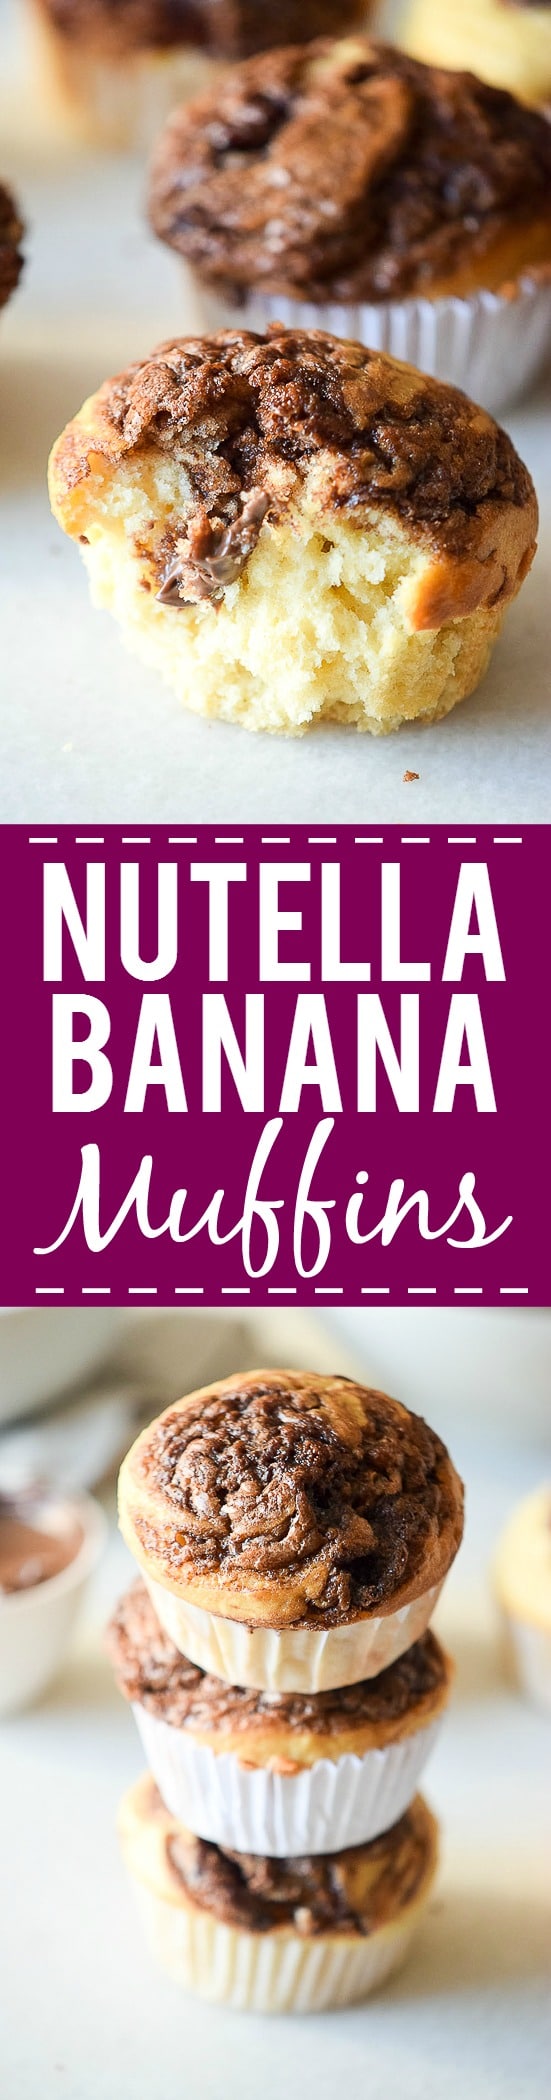 Nutella Banana Muffins Recipe - Decadent chocolate and creamy sweet bananas make a heavenly combination that's perfect, even for breakfast in this Nutella Banana Muffins recipe! Great breakfast idea for kids and freezer friendly too.